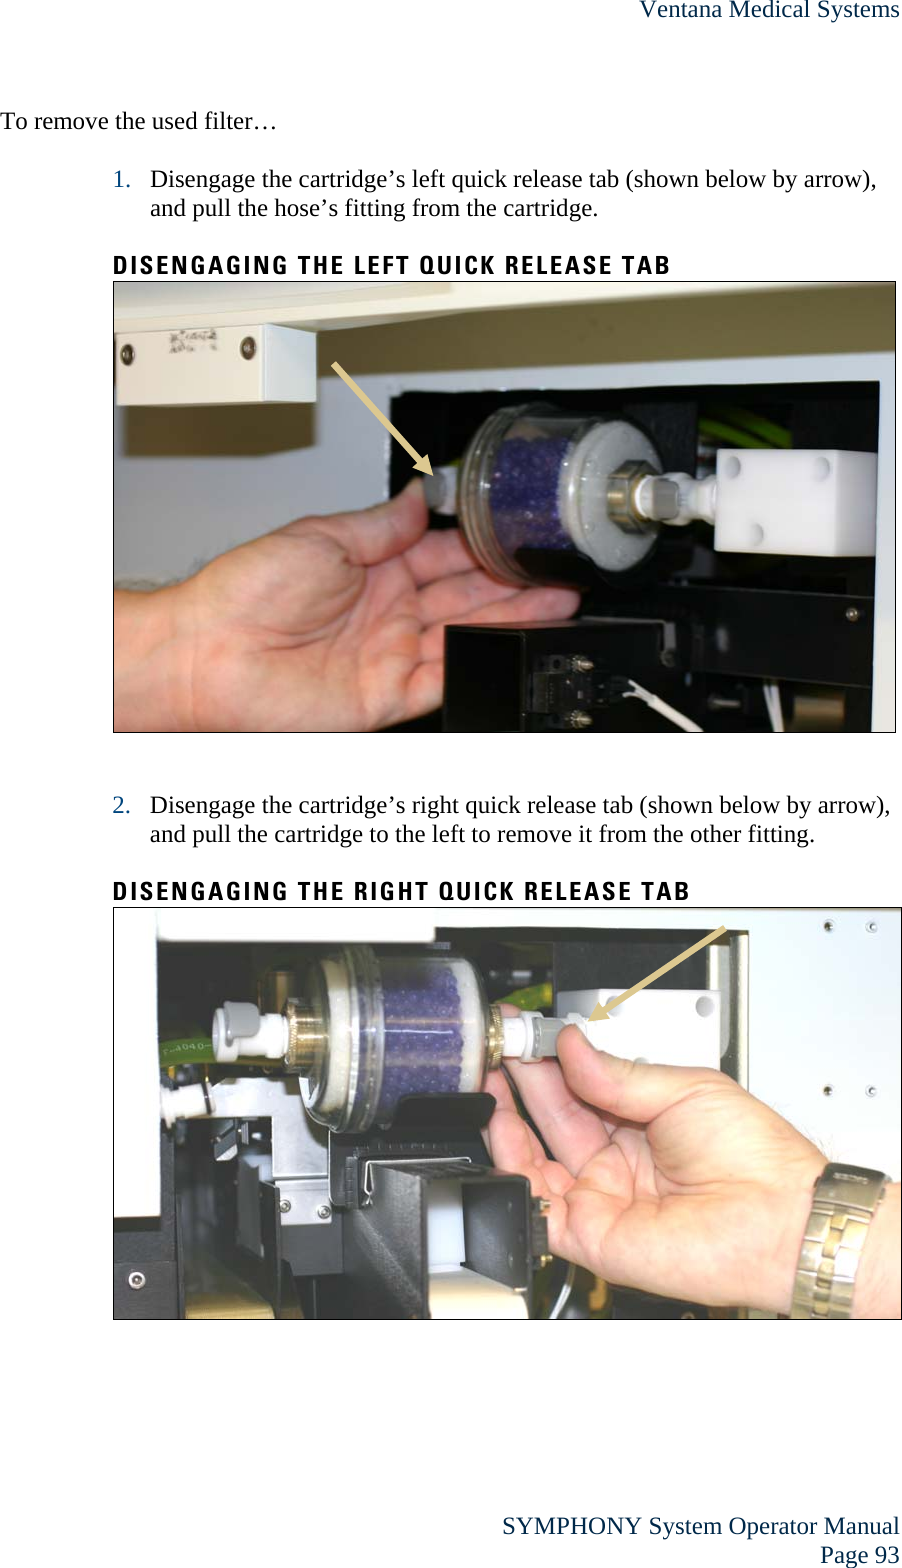 Ventana Medical Systems  SYMPHONY System Operator Manual Page 93 To remove the used filter…  1. Disengage the cartridge’s left quick release tab (shown below by arrow), and pull the hose’s fitting from the cartridge.  DISENGAGING THE LEFT QUICK RELEASE TAB    2. Disengage the cartridge’s right quick release tab (shown below by arrow), and pull the cartridge to the left to remove it from the other fitting.  DISENGAGING THE RIGHT QUICK RELEASE TAB   